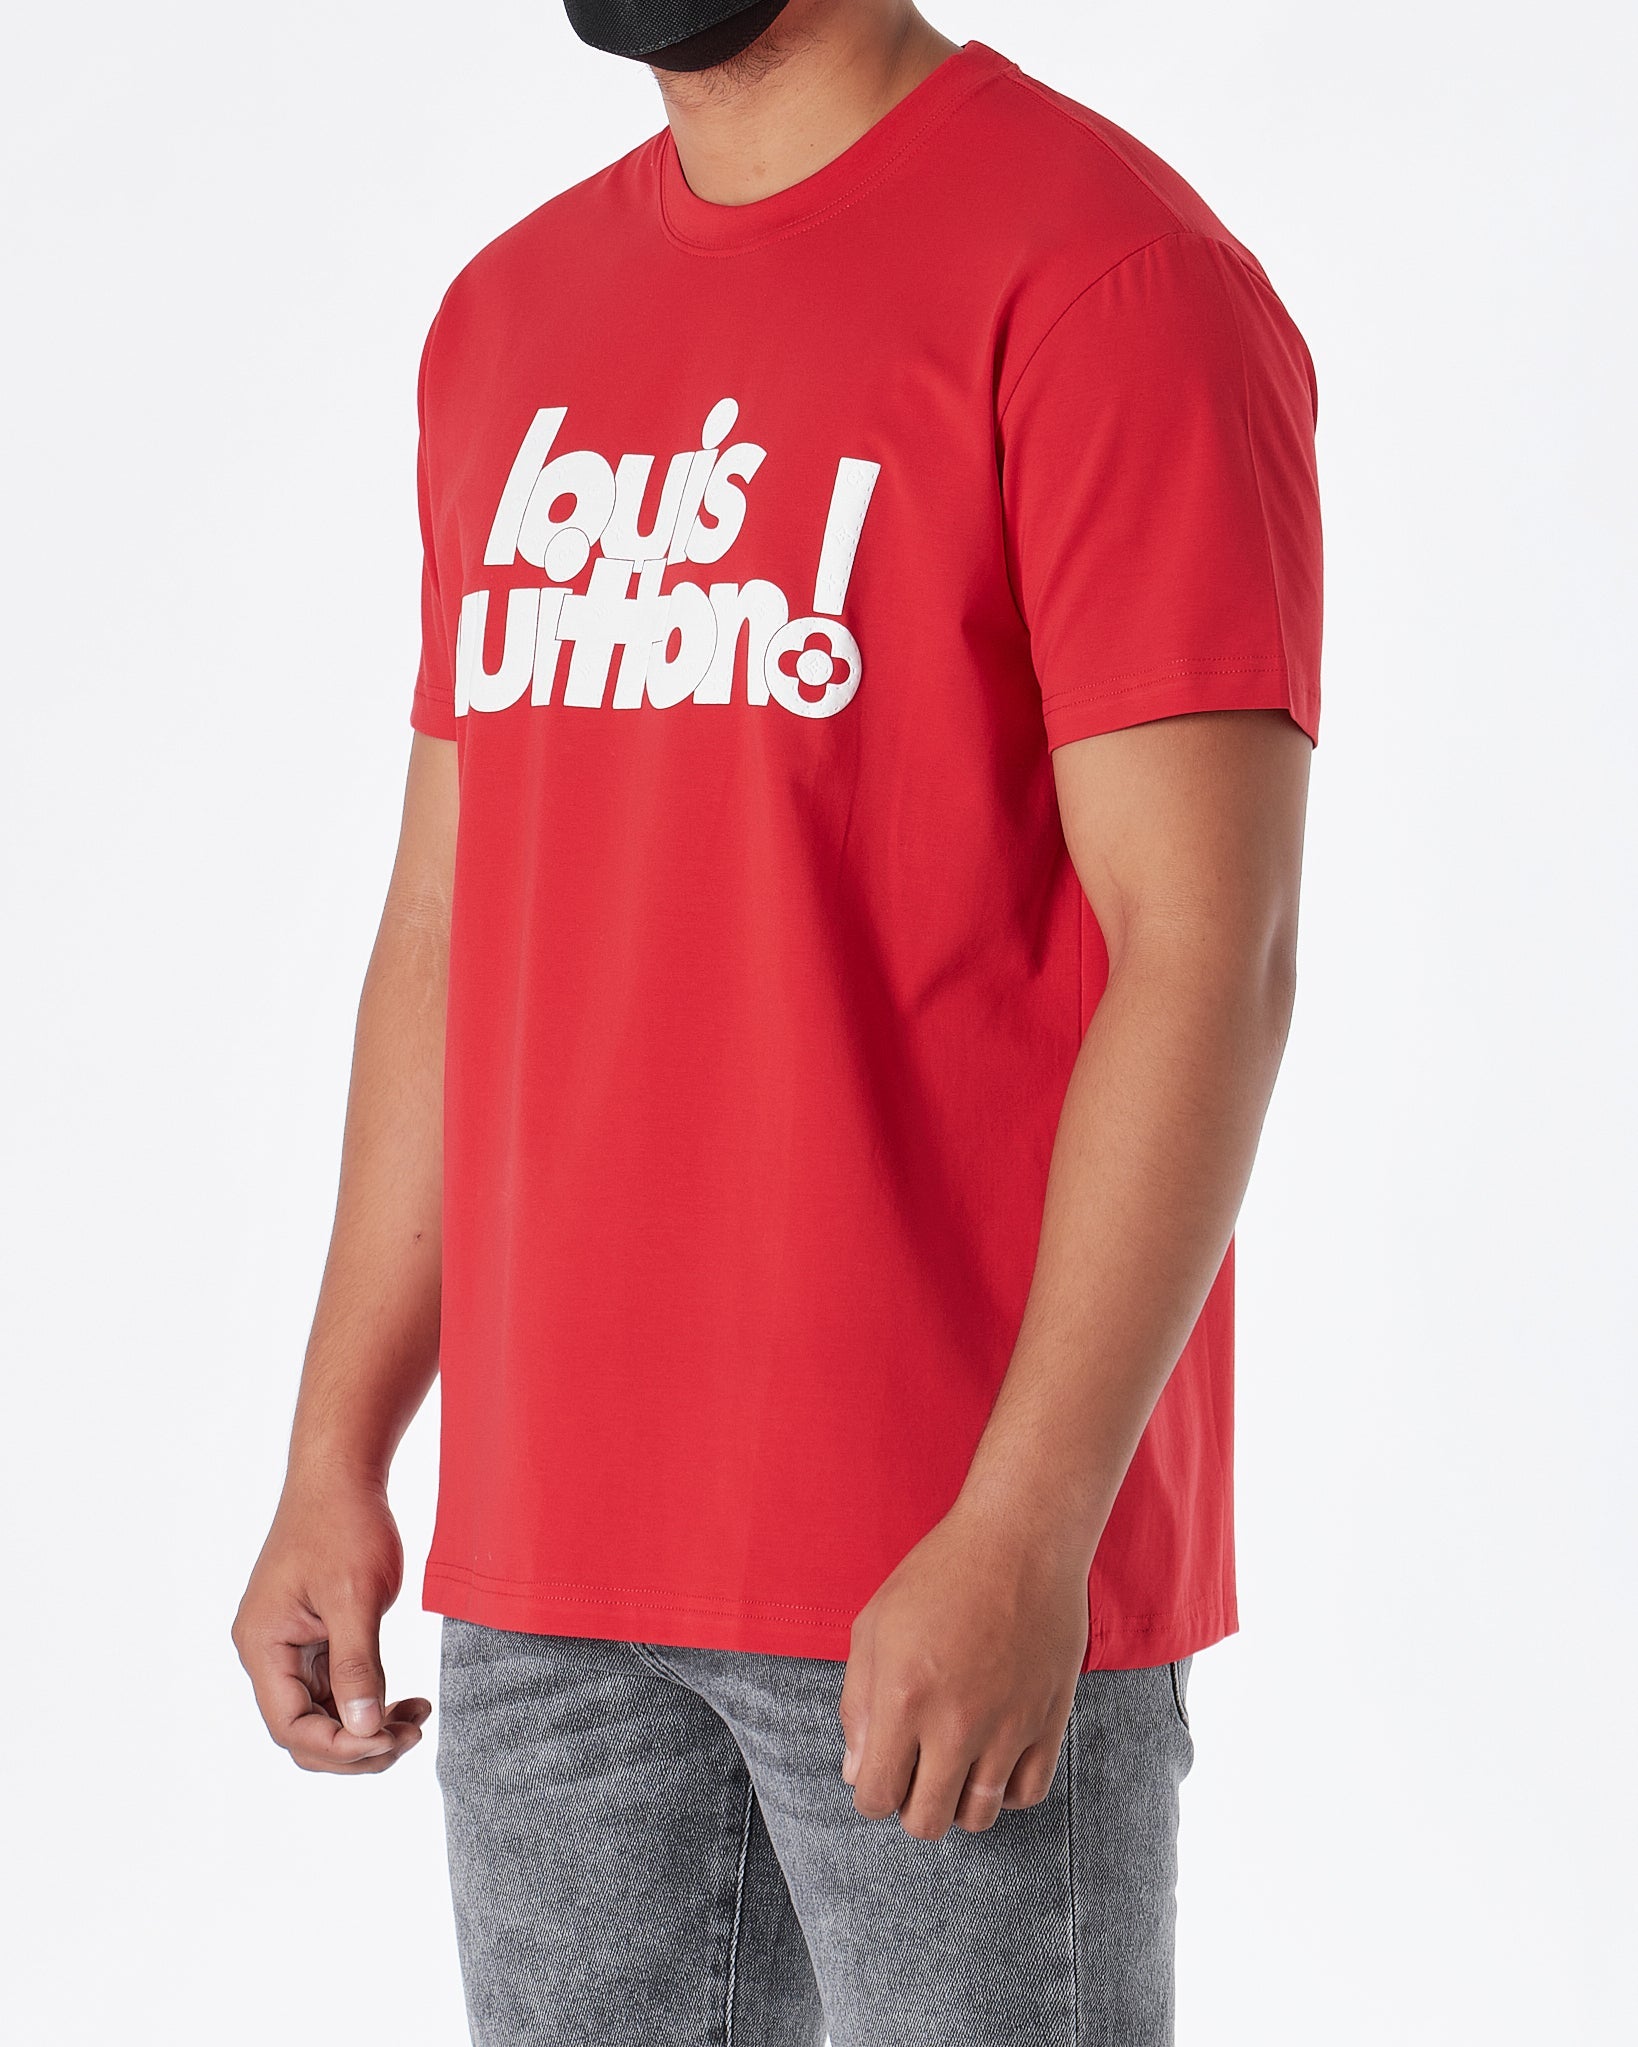 LV Graphic Men T-Shirt 15.90 - MOI OUTFIT